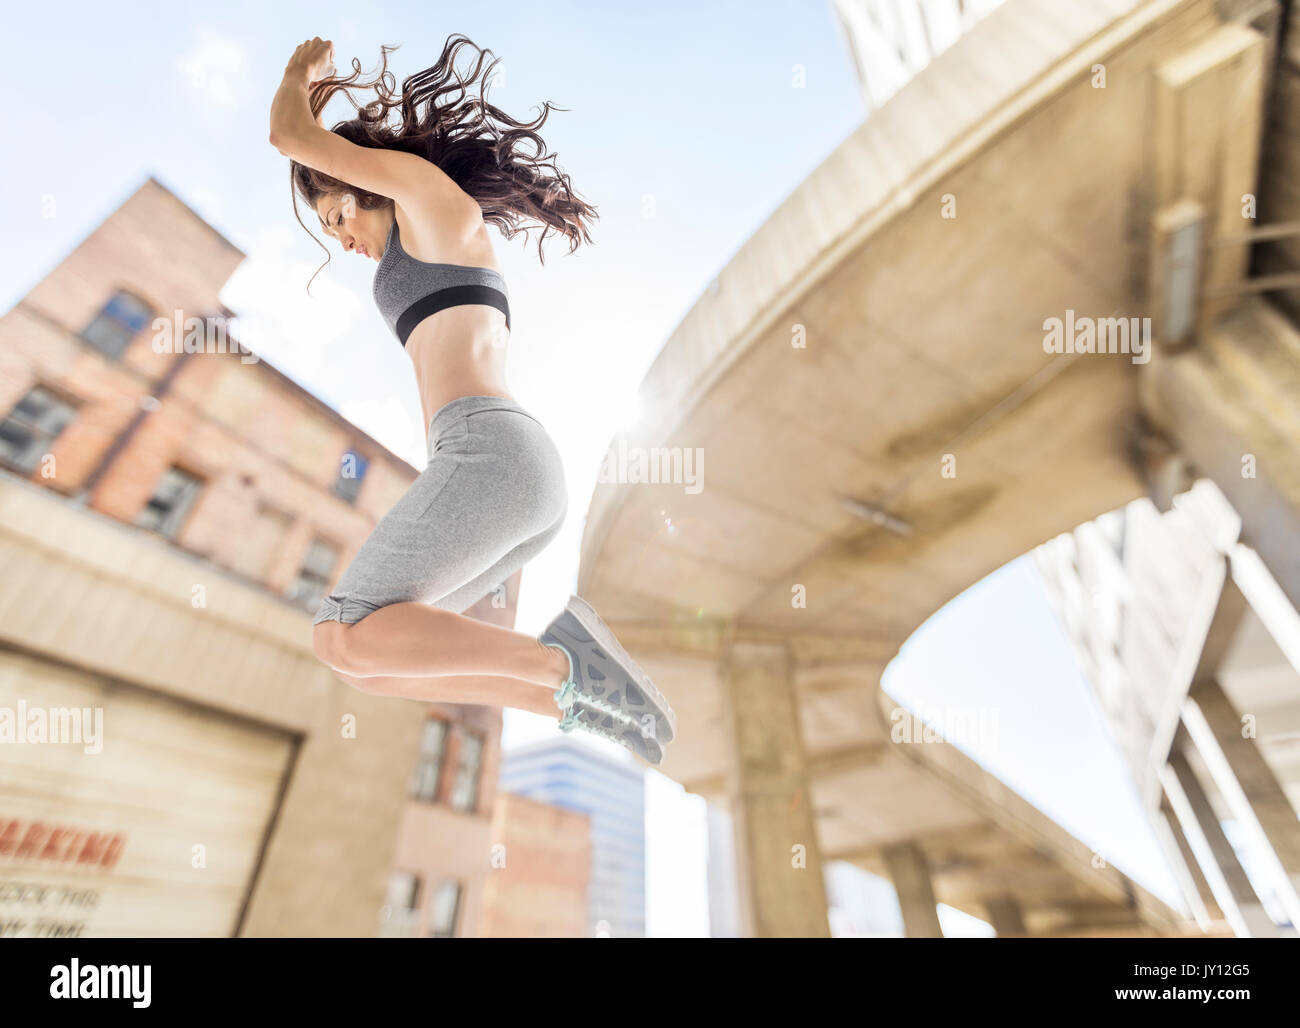 Caucasian woman jumping in city Stock Photo